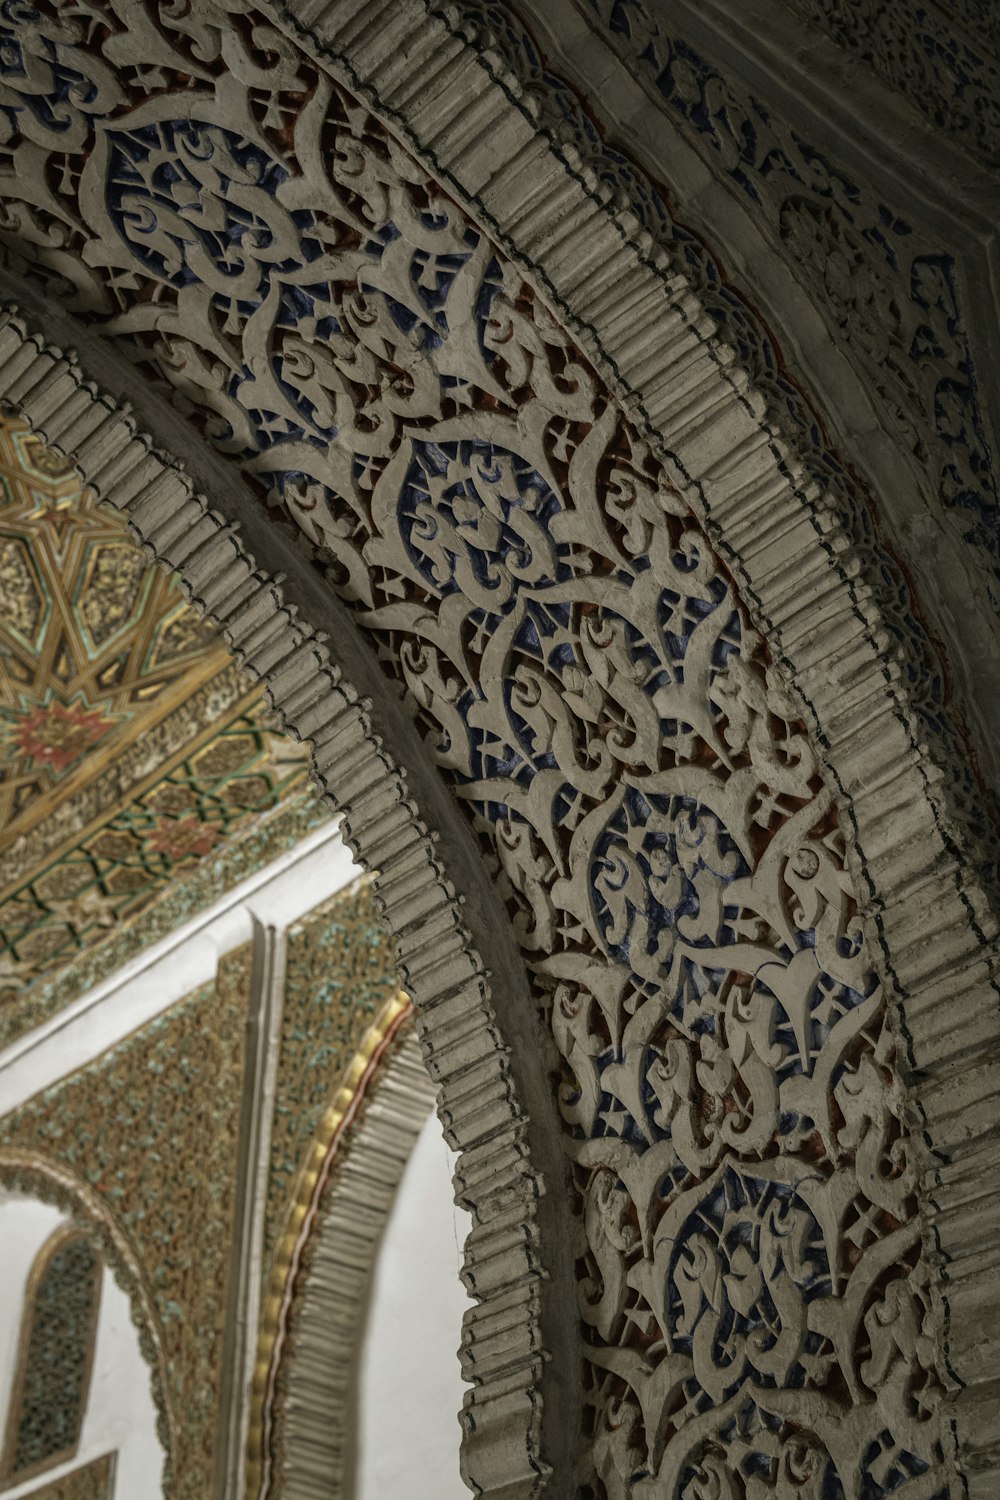 a ceiling with designs